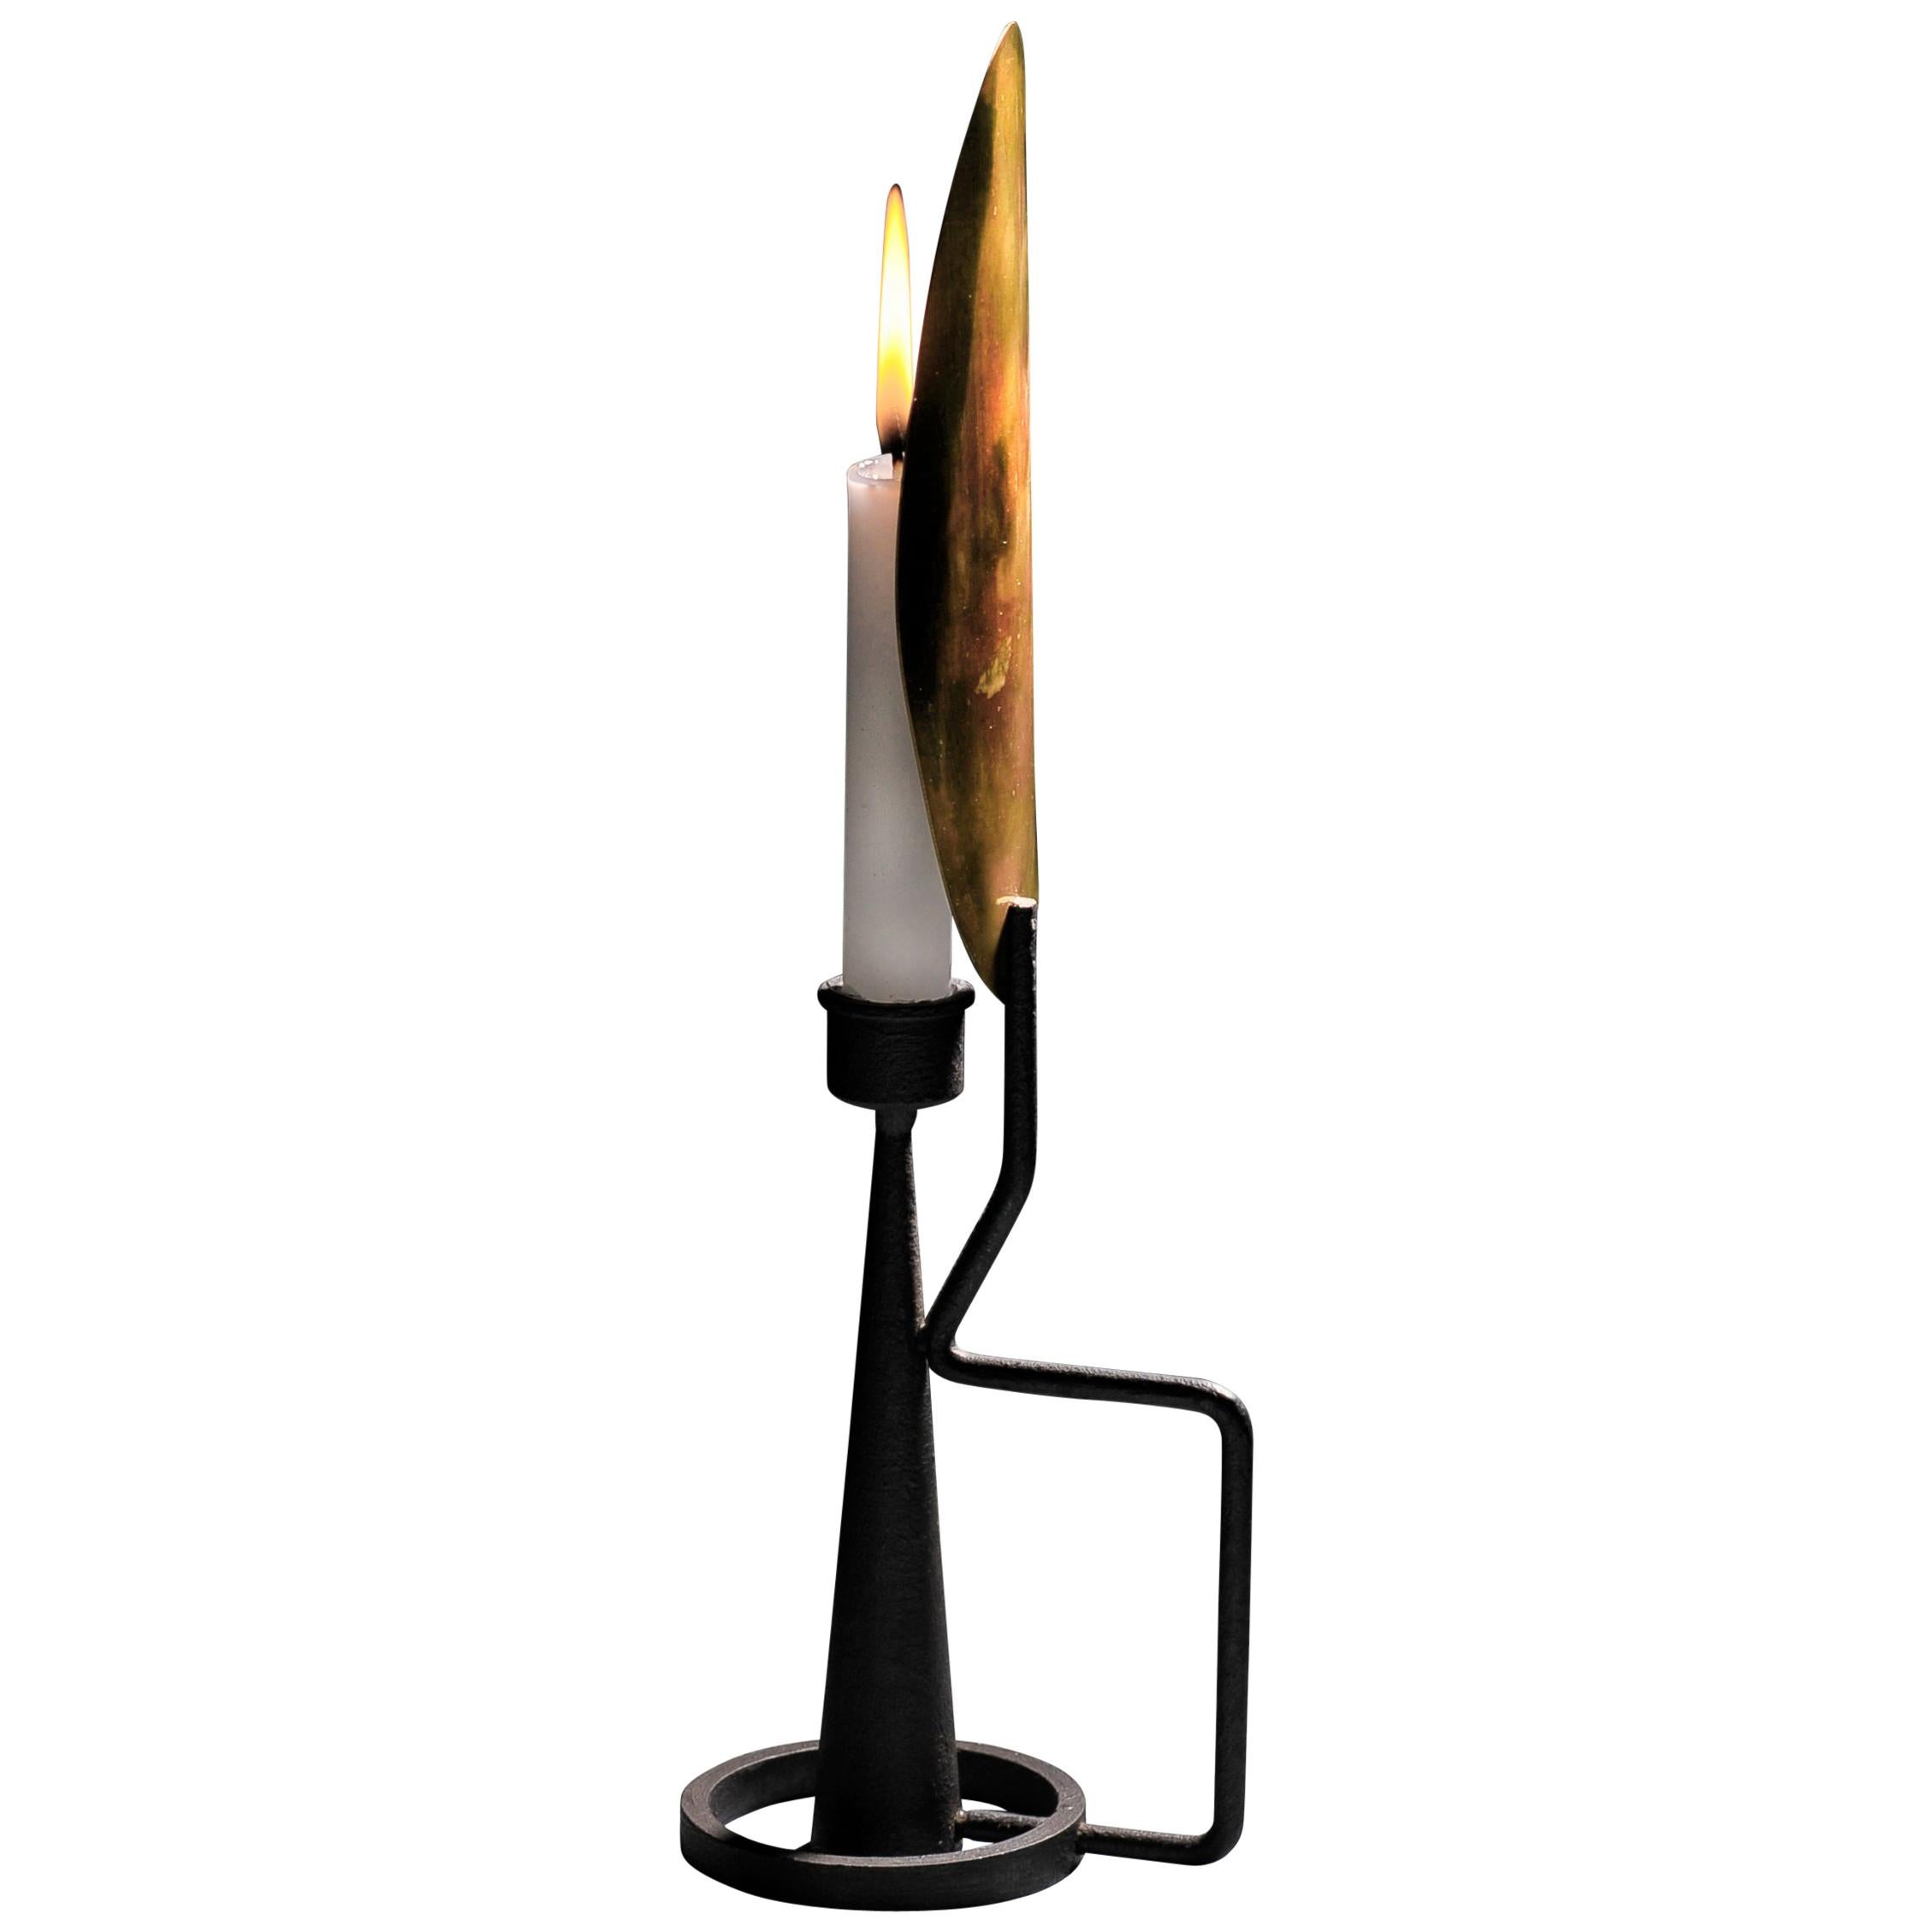 Unique Sculpted Steel Candleholder “Feather”, Signed by Lukasz Friedrich For Sale